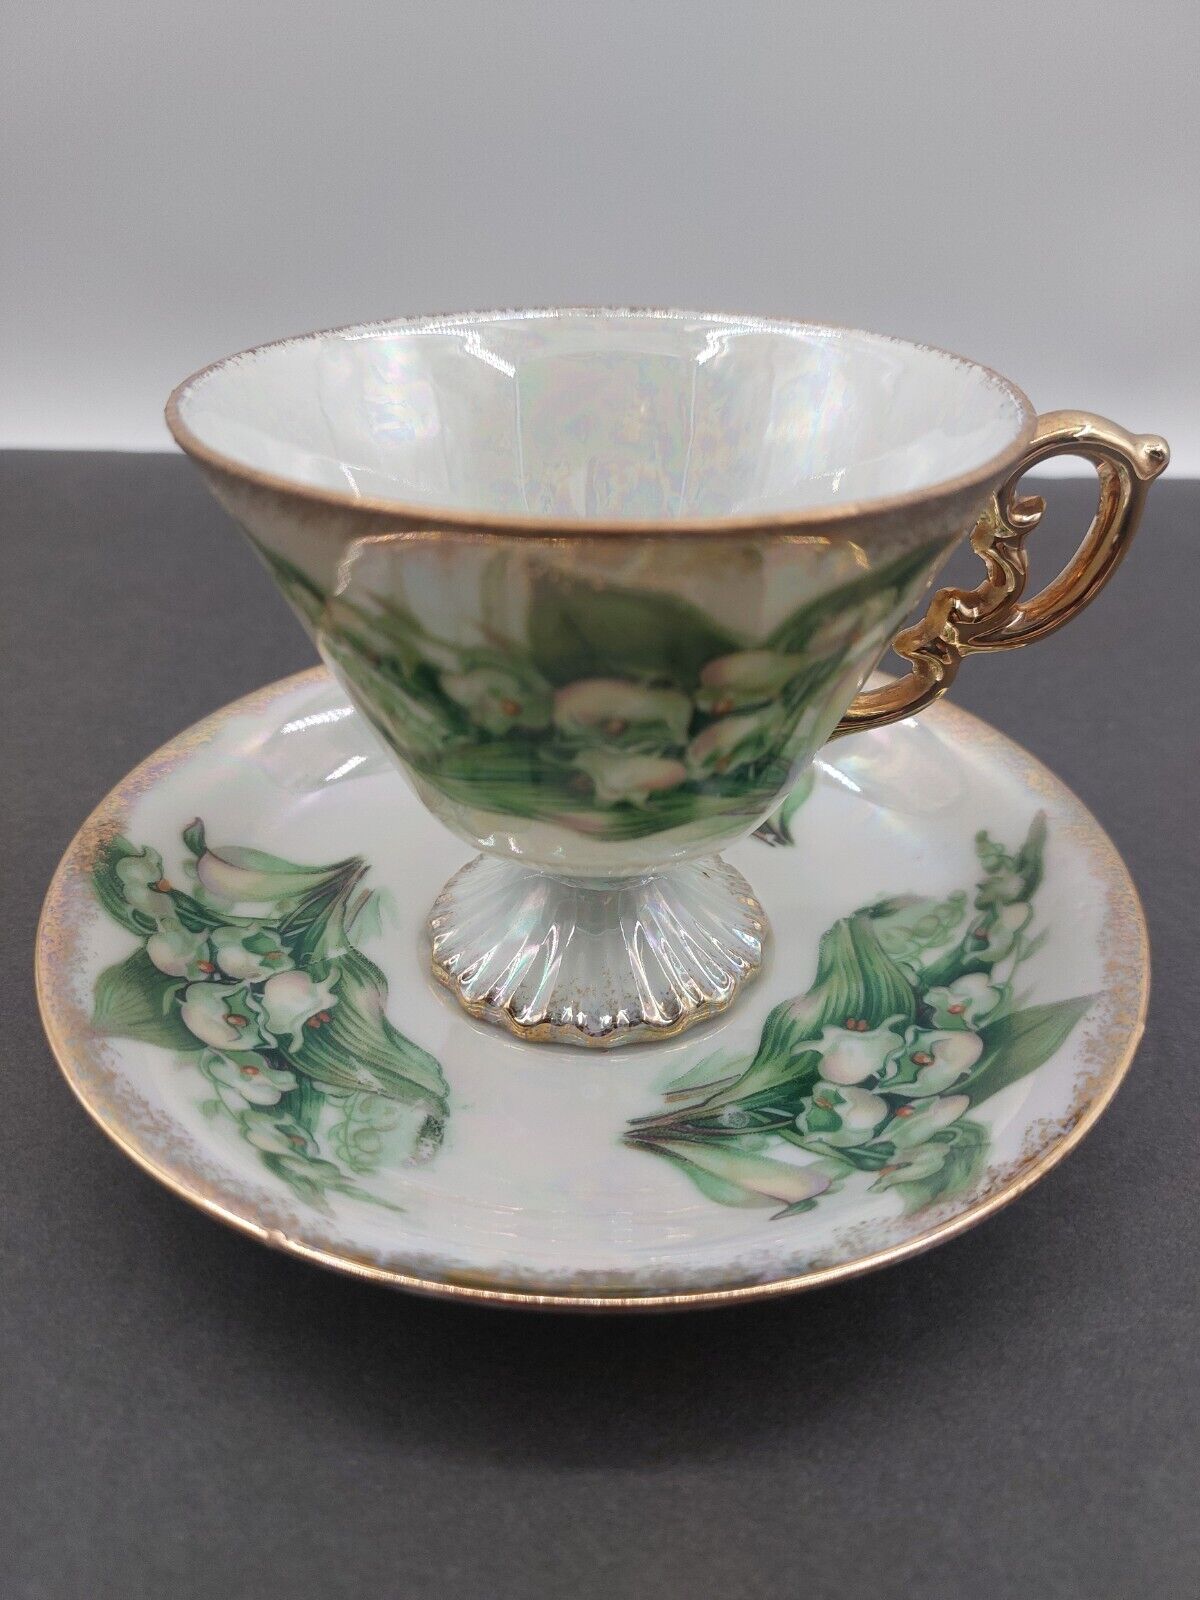 Vtg Wheelock Peoria Teacup And Saucer Set Lily Of The Valley  May Made In Japan